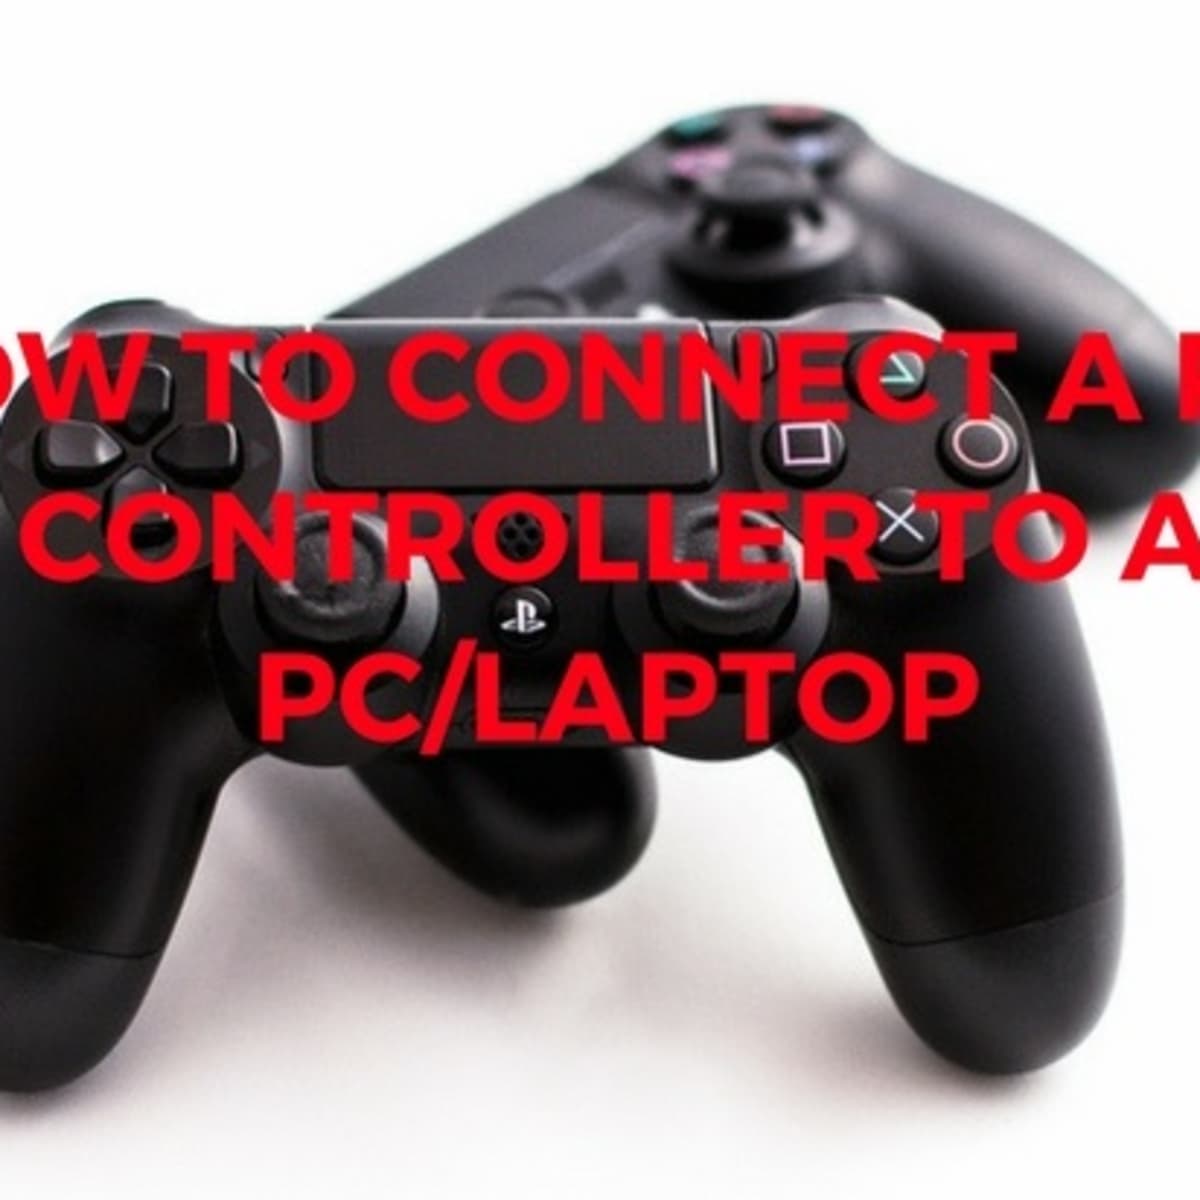 How to Connect PS4 Controller to a PC/Laptop - TurboFuture